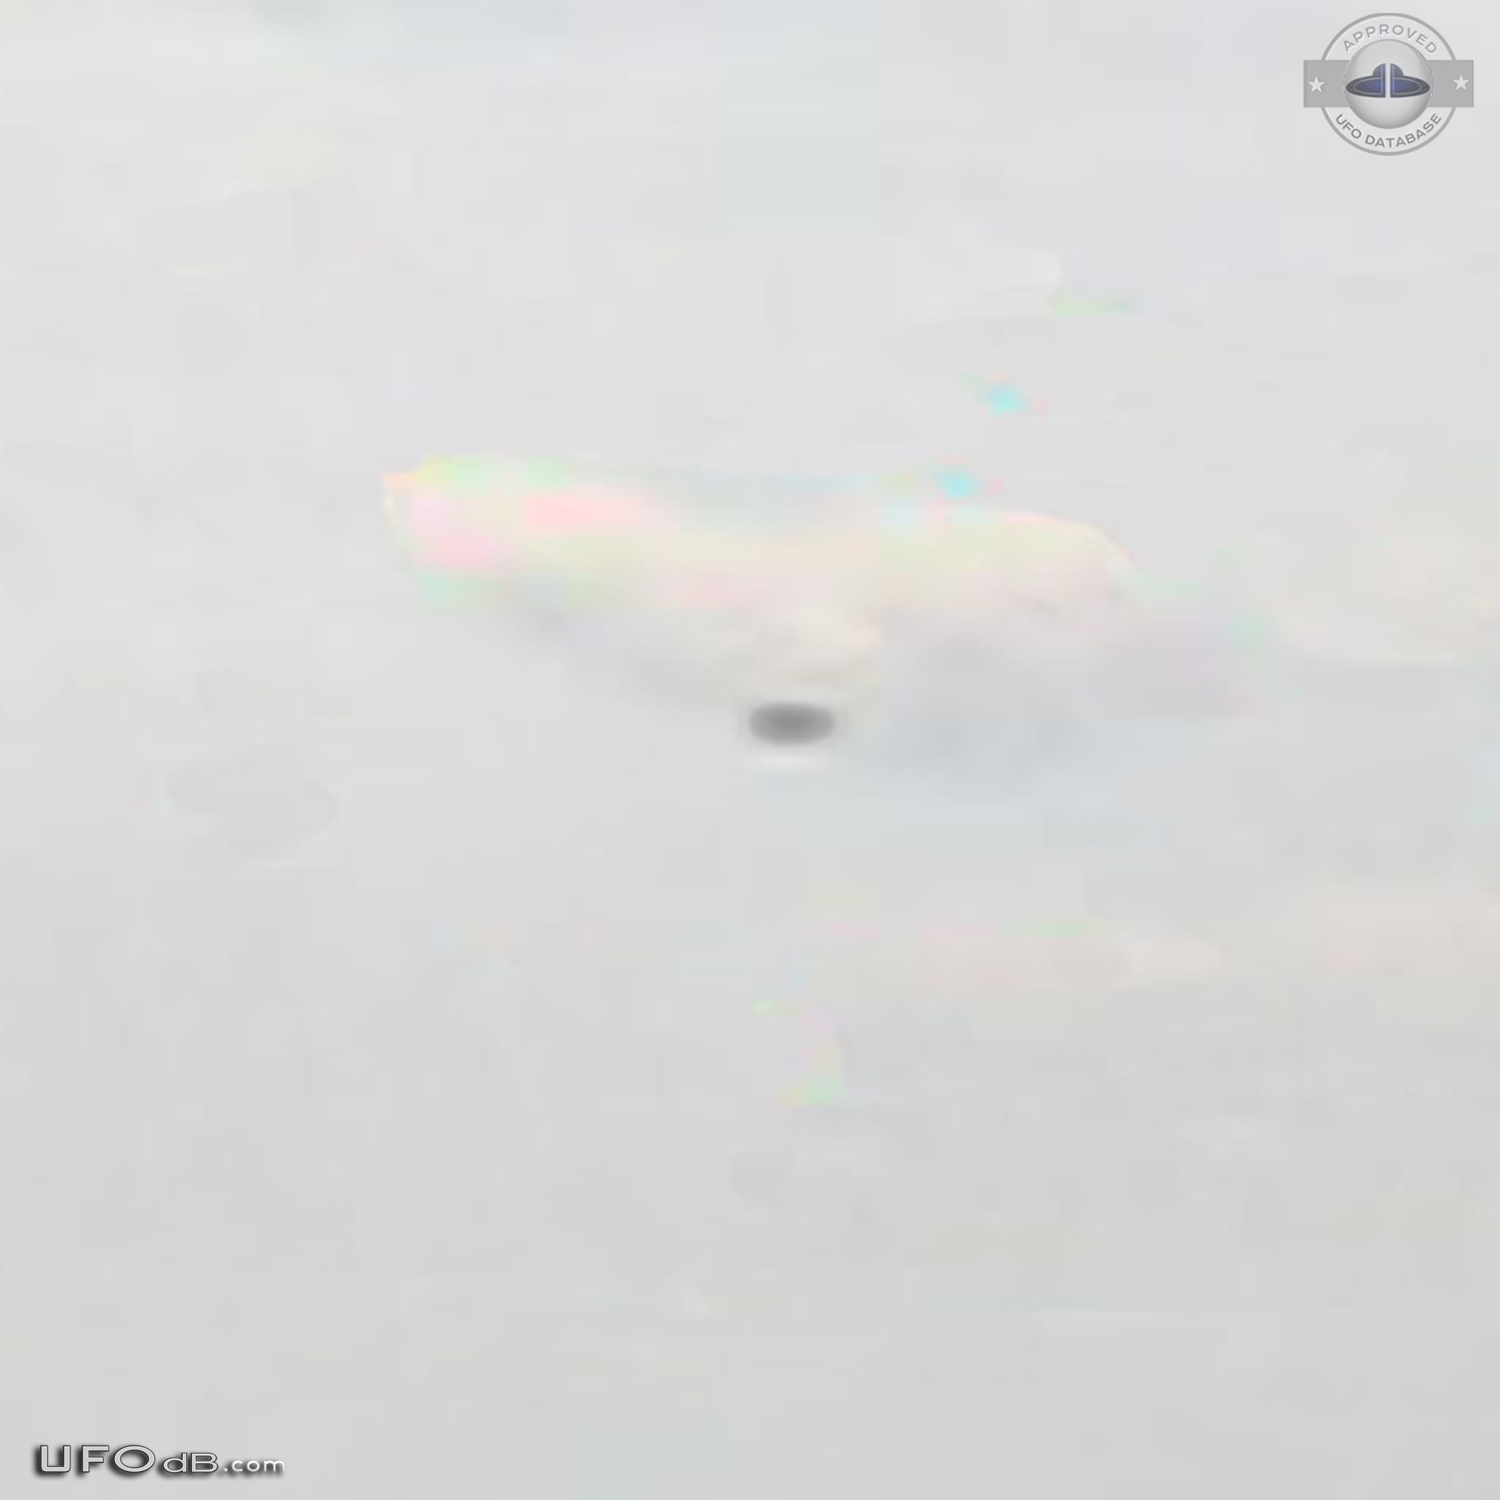 UFO in the city of Rize Turkey near the Black Sea caught on picture UFO Picture #461-3